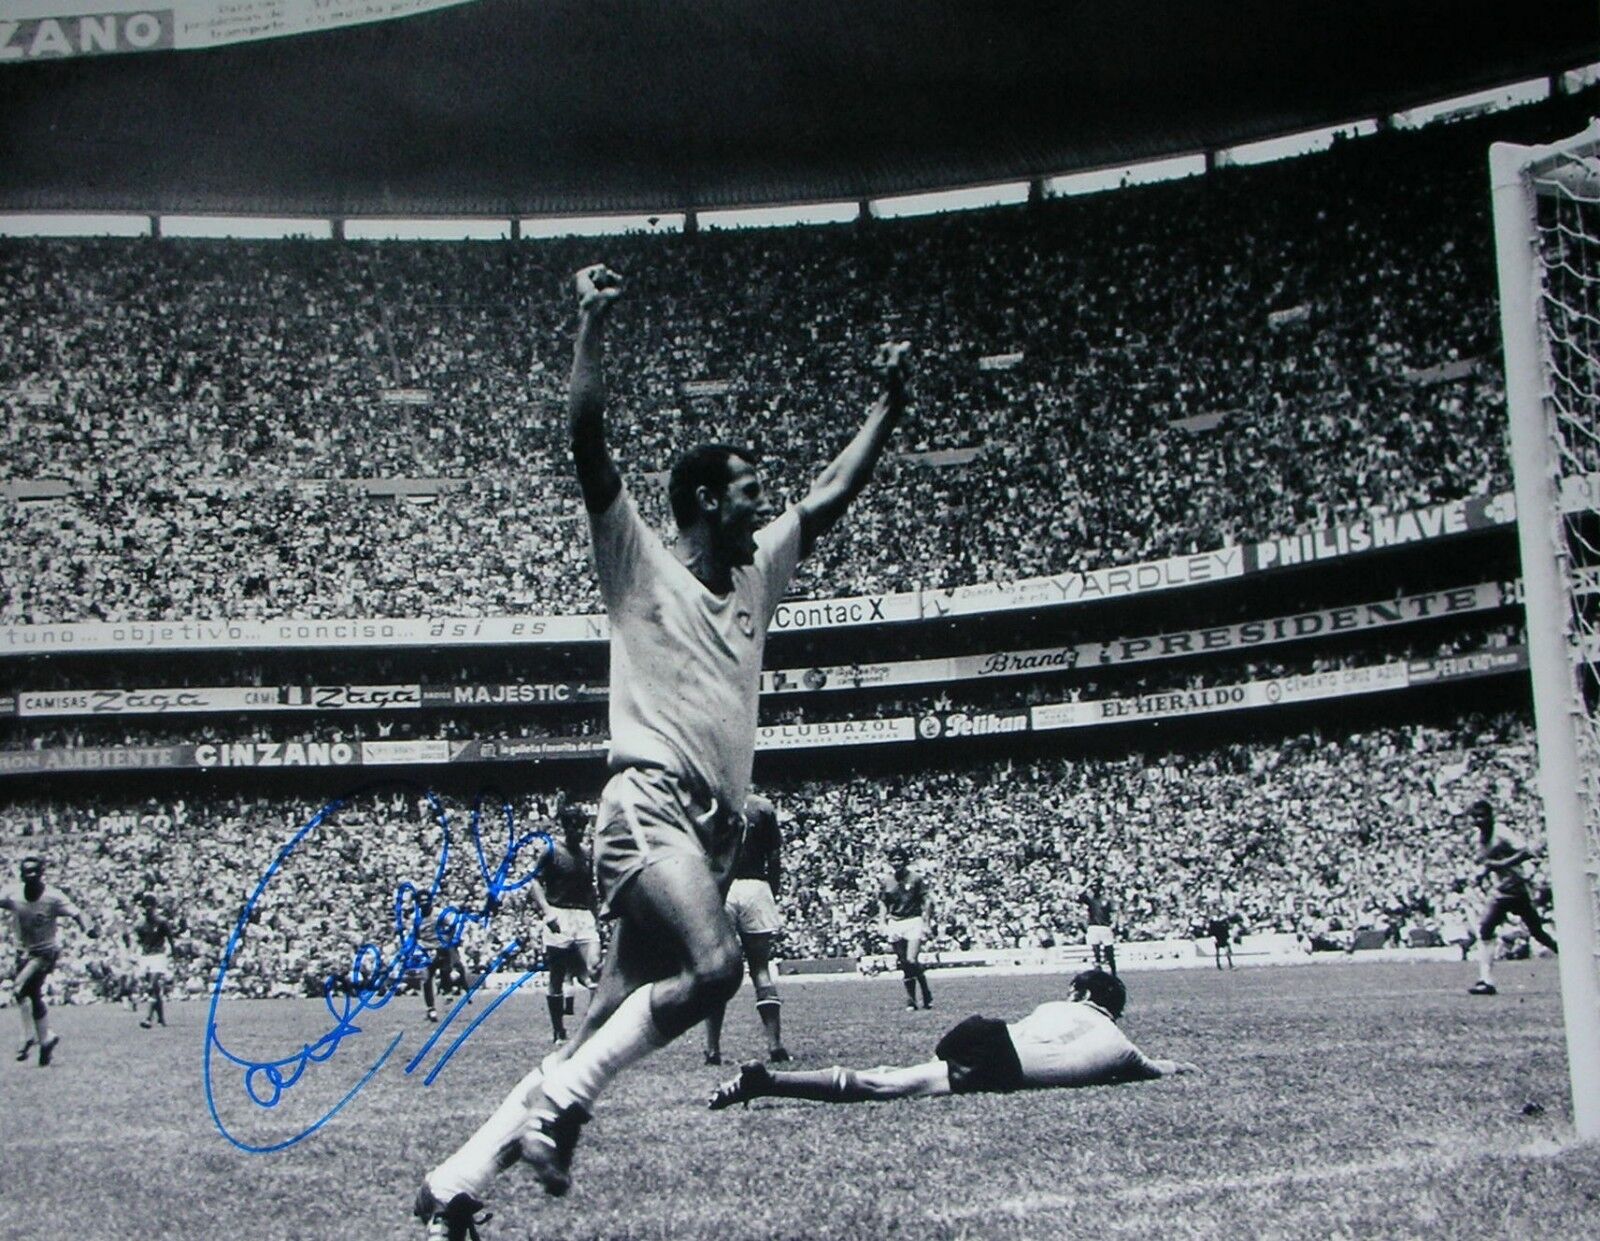 CARLOS ALBERTO SIGNED BRAZIL 1970 FIFA WORLD CUP FINAL 16x12 Photo Poster painting PELE PROOF